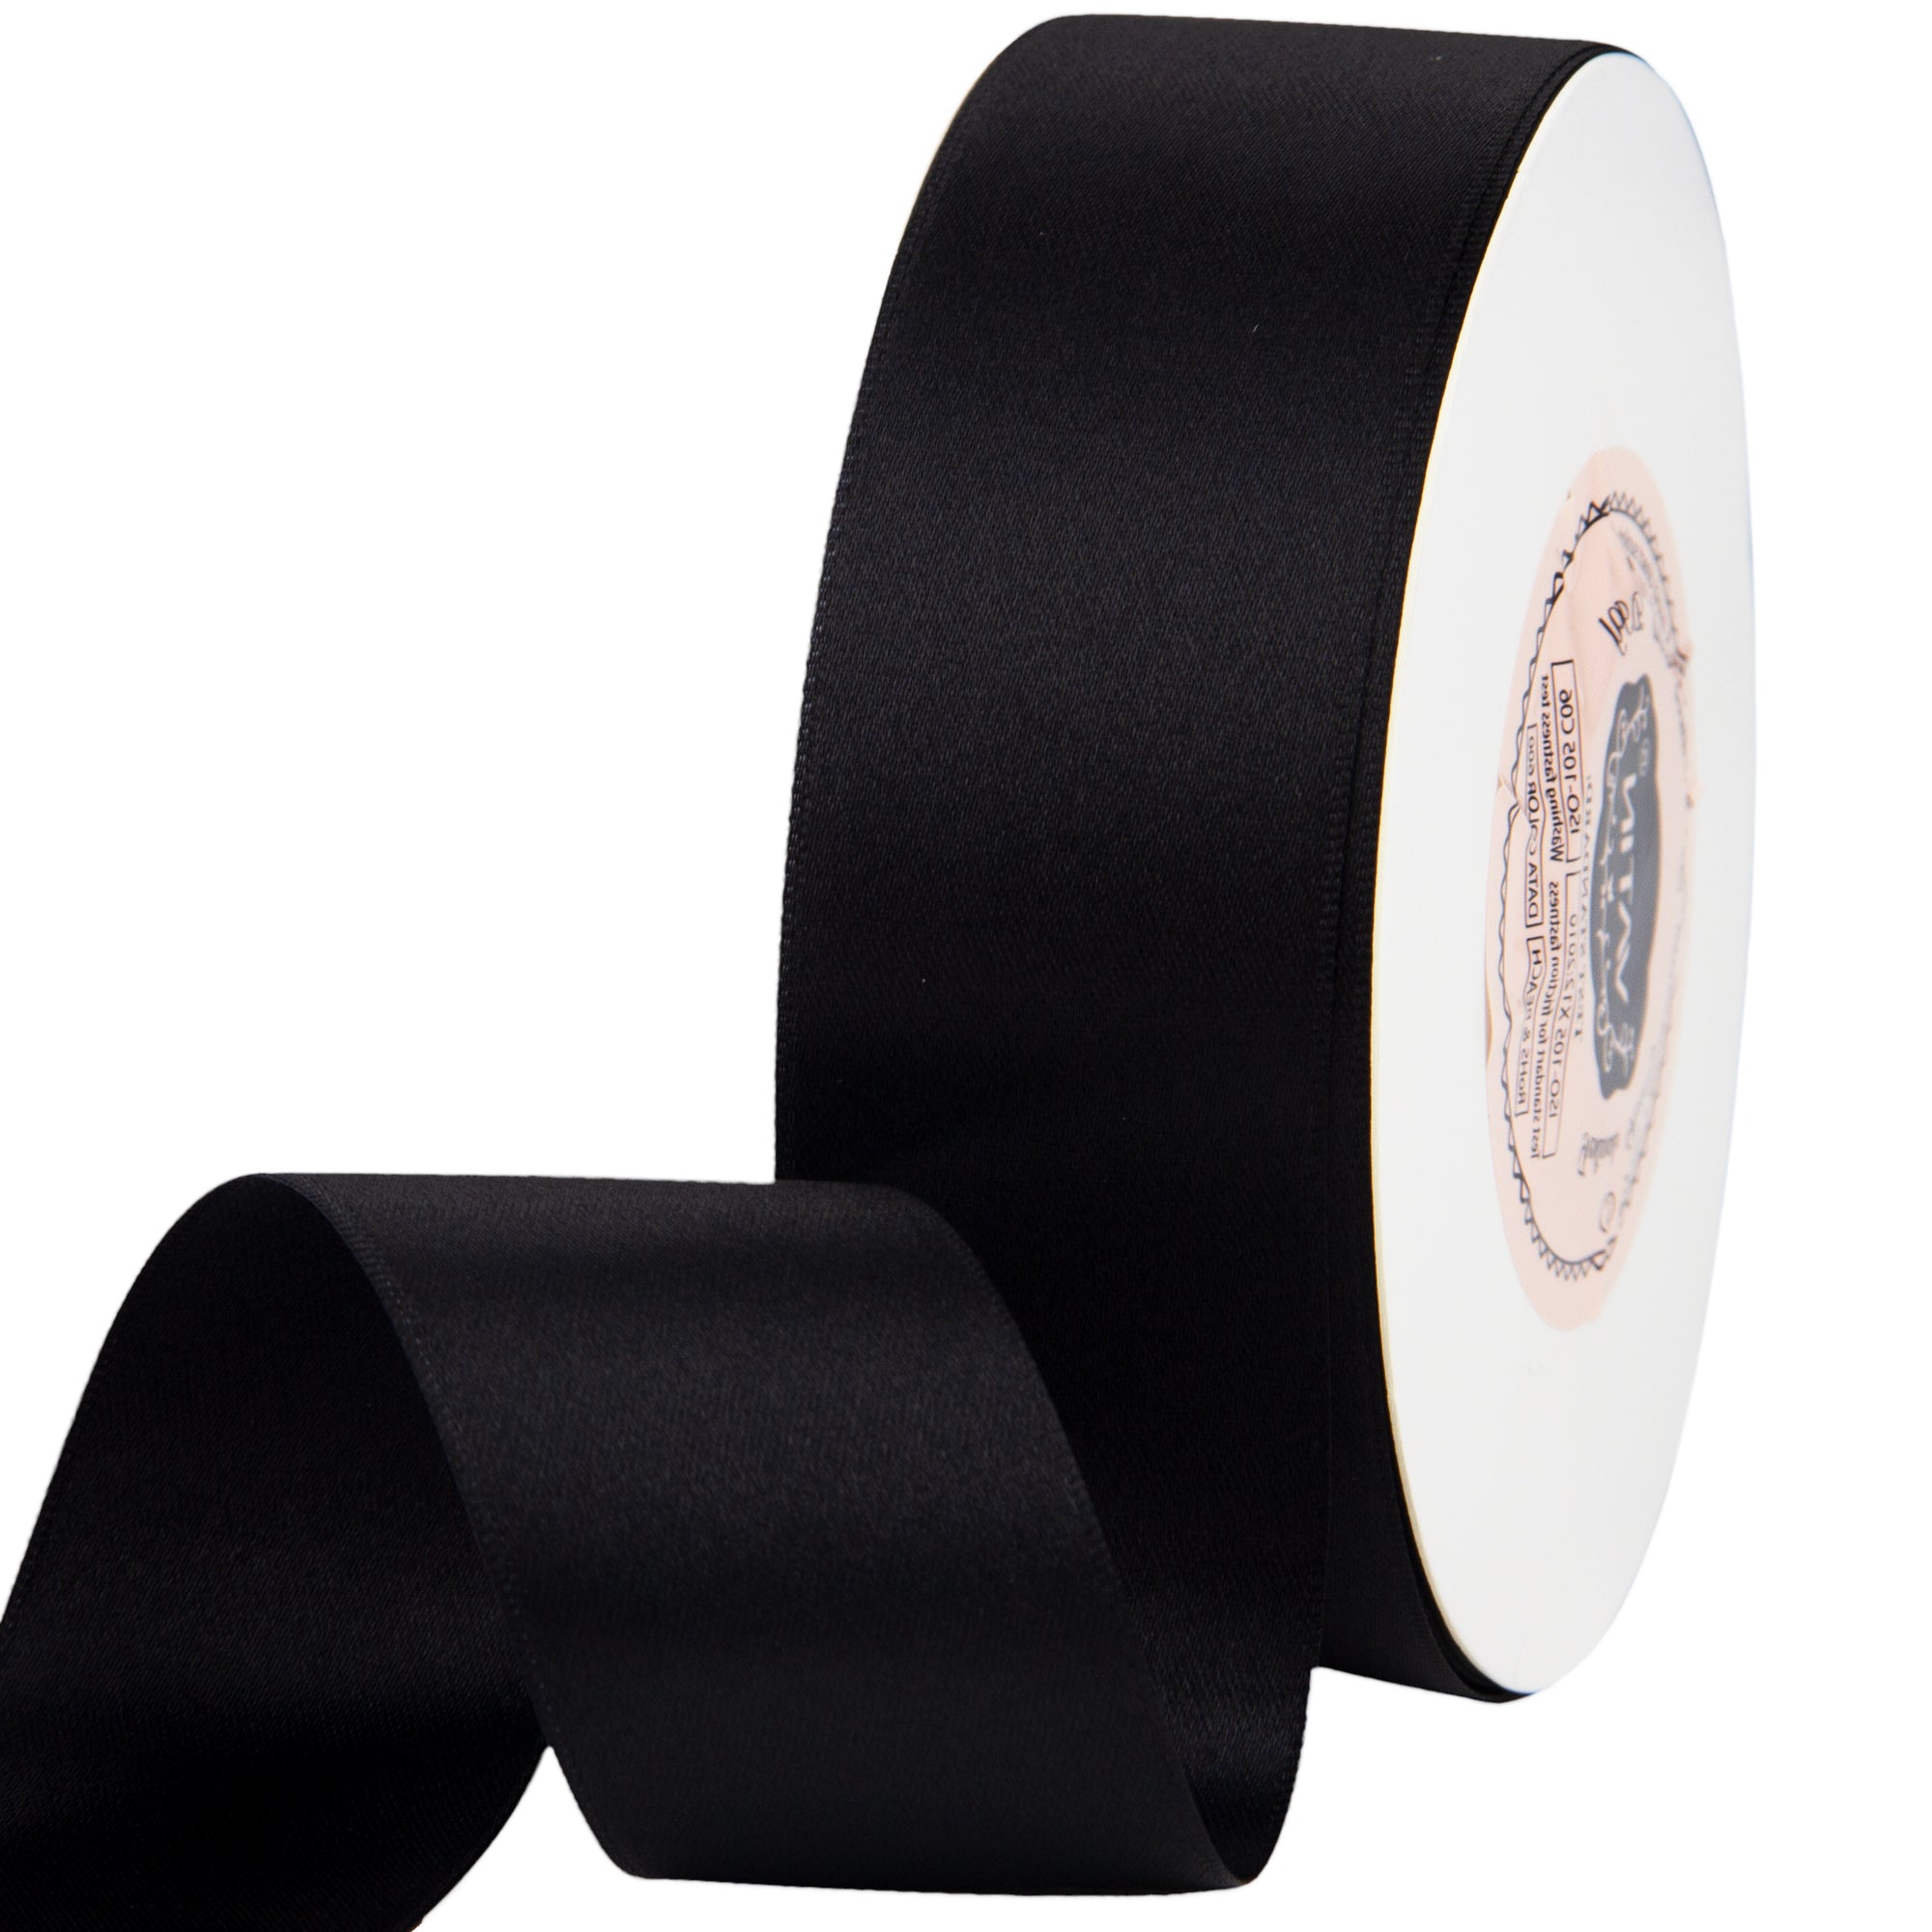 Satin Wine Color Ribbon 1-1/2 inch x 50 Yards Double Face for Gift